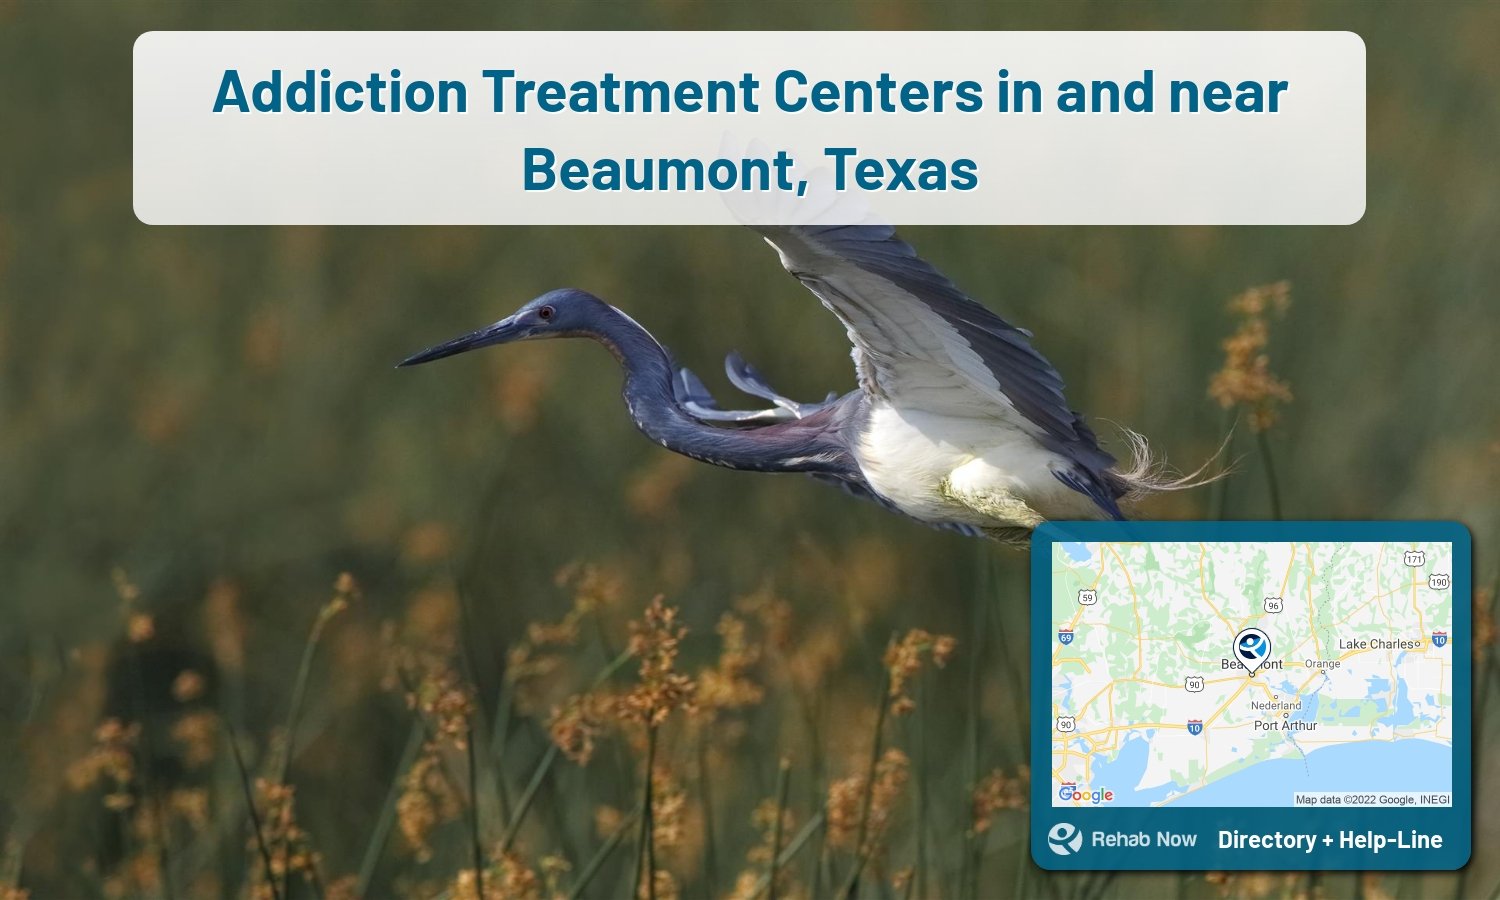 Beaumont, TX Treatment Centers. Find drug rehab in Beaumont, Texas, or detox and treatment programs. Get the right help now!